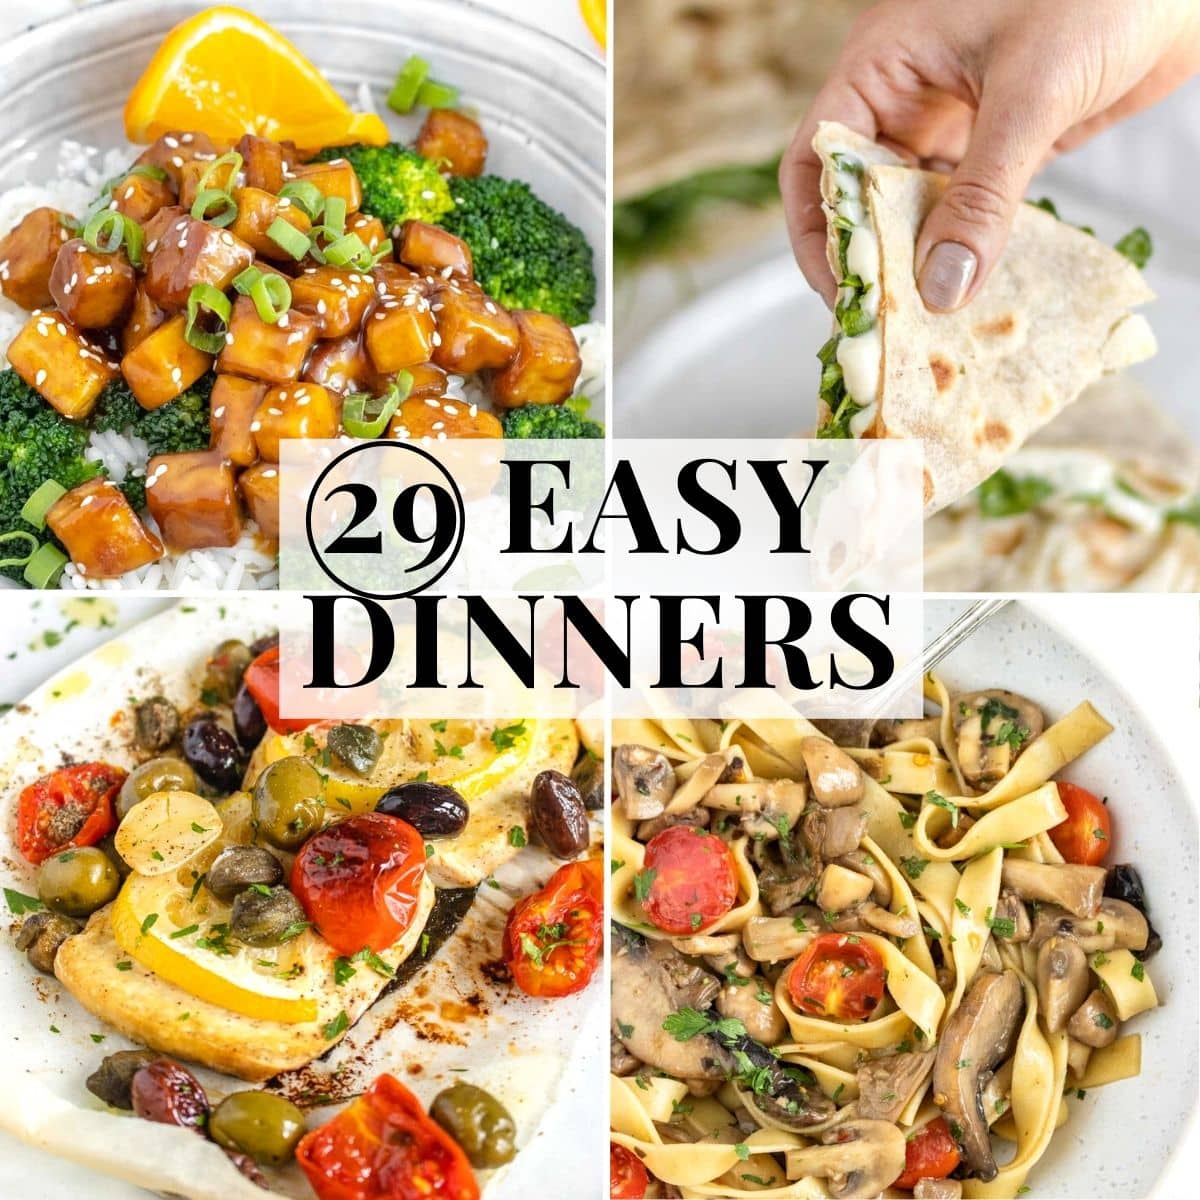 29 easy dinners including pasta tofu and piadina